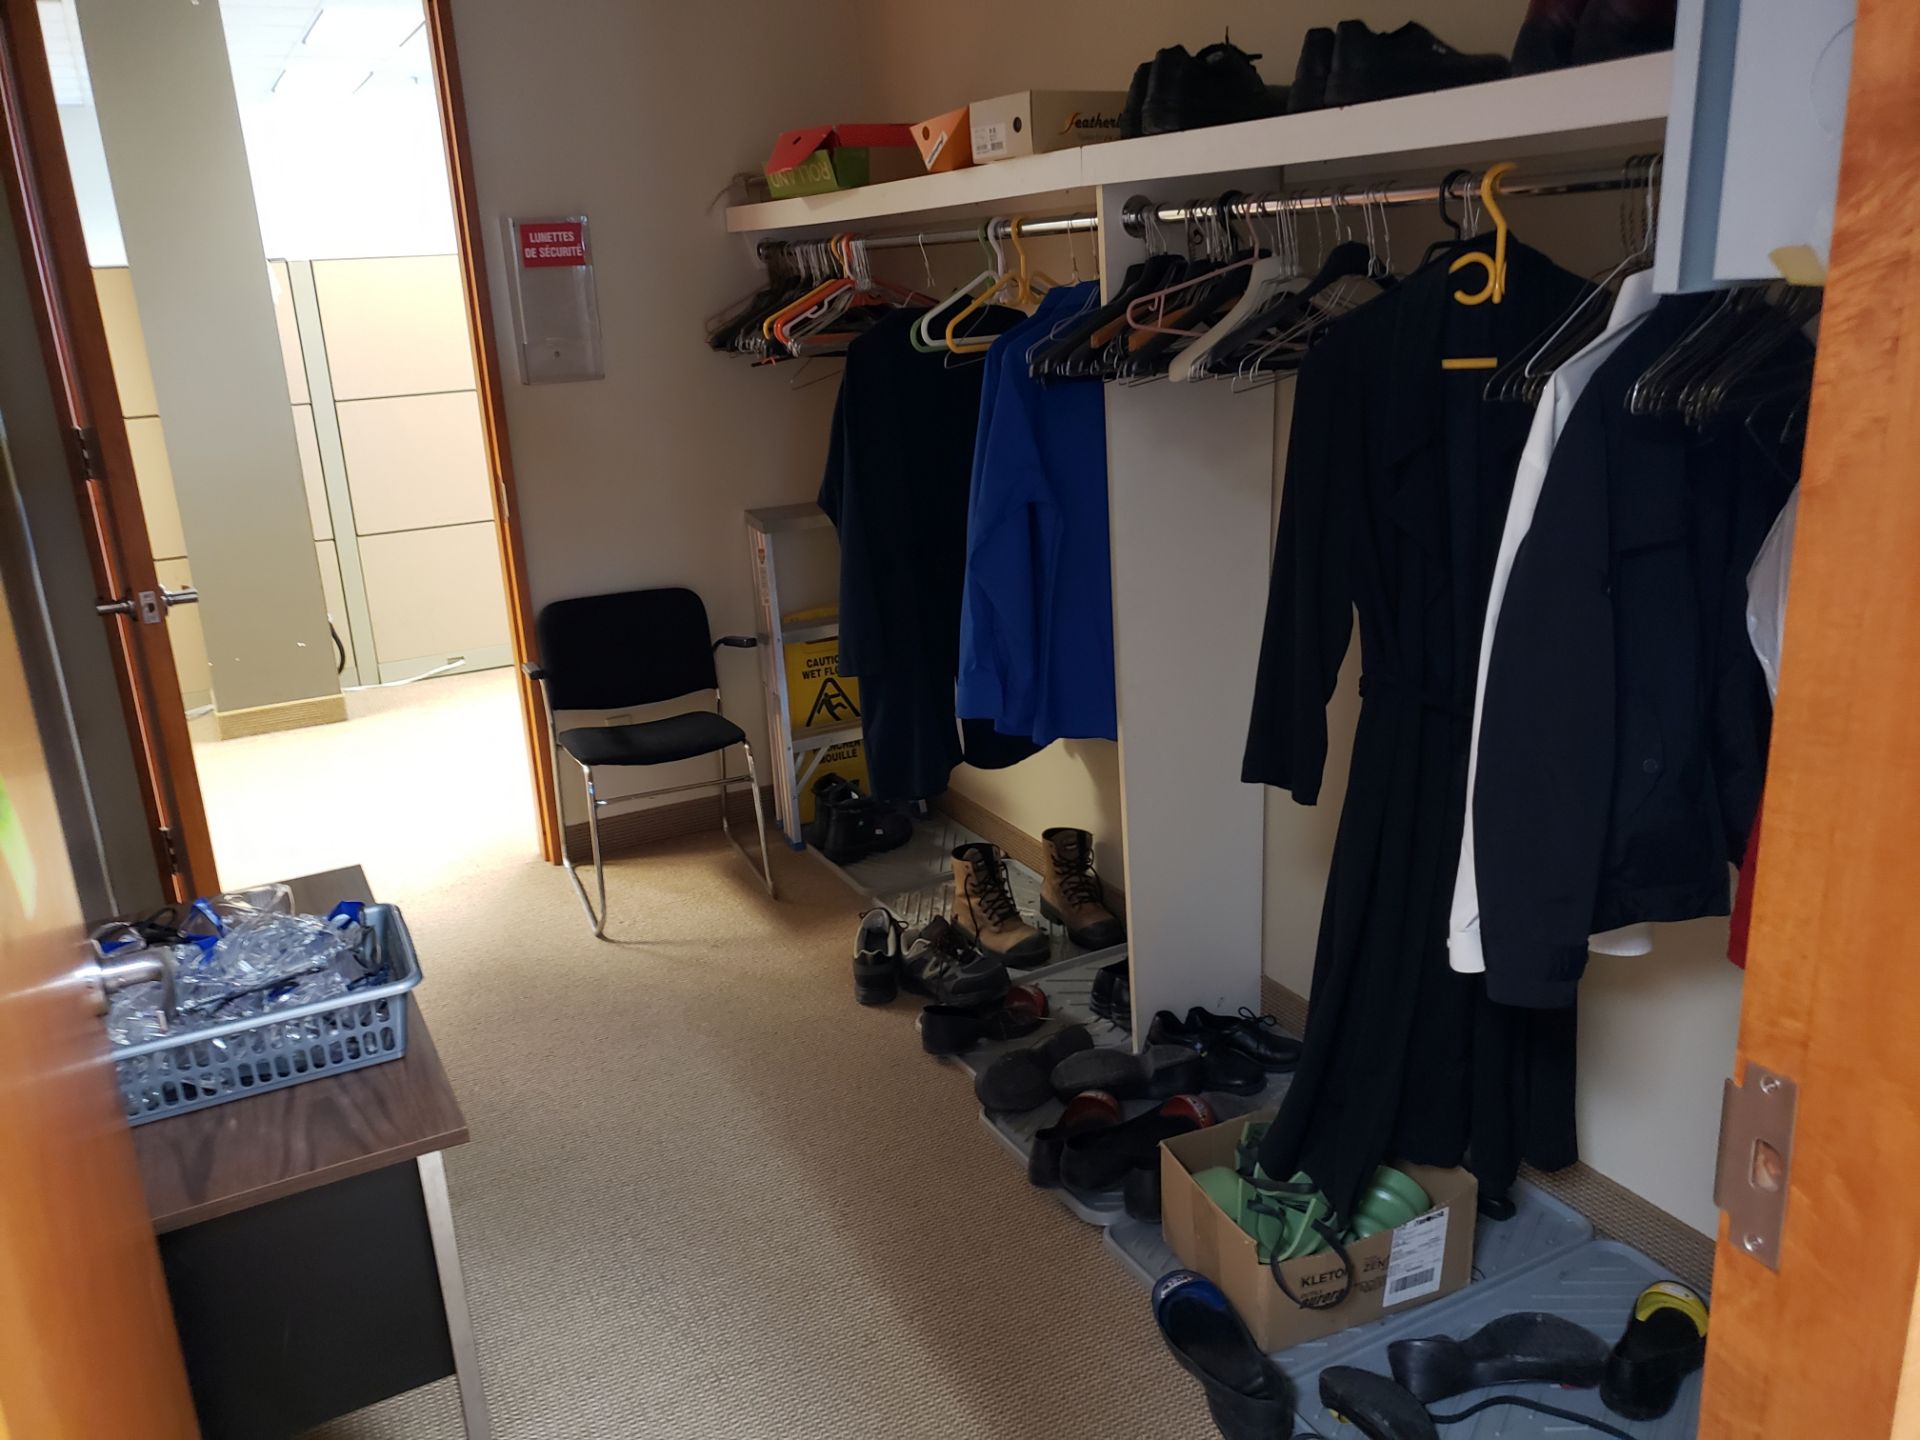 Contents of Room (no structures) and cases of clothing, uniforms, shoes, hangars, chair, desk, mats